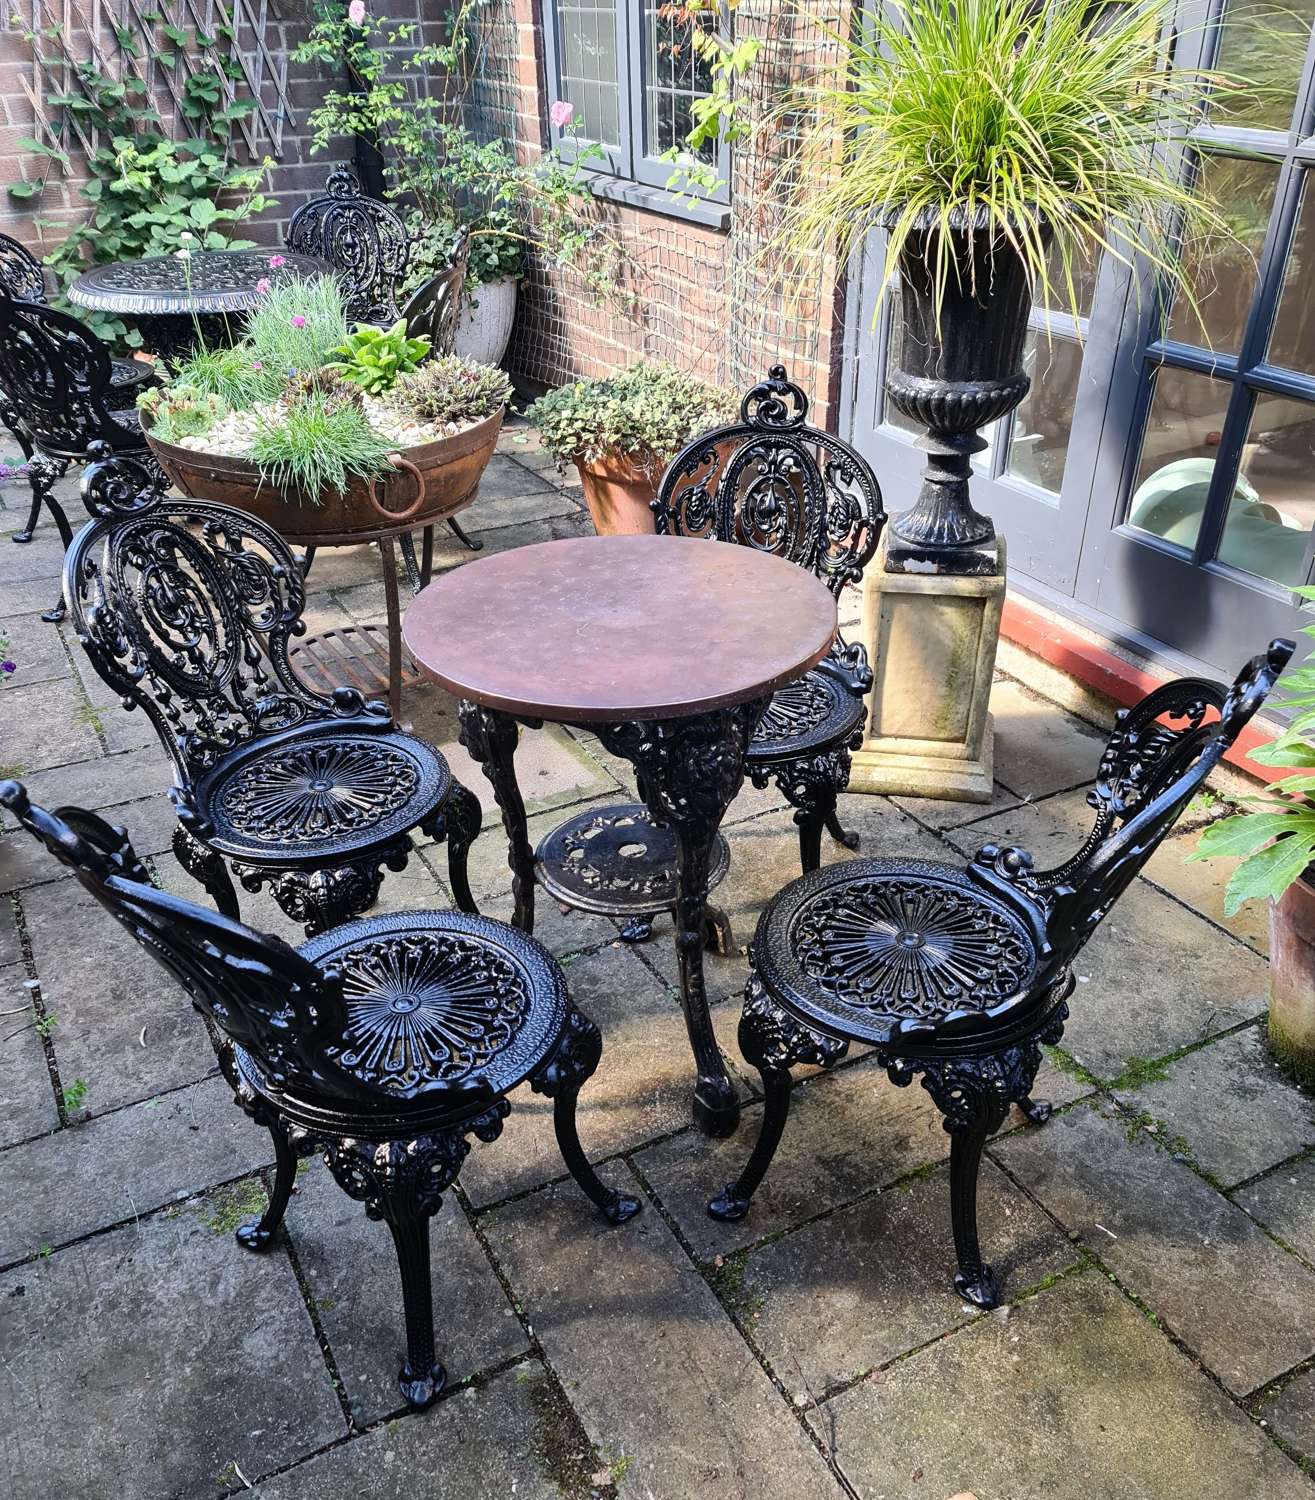 Wonderful heavy Cast-iron Garden Set of Table and Four Chairs